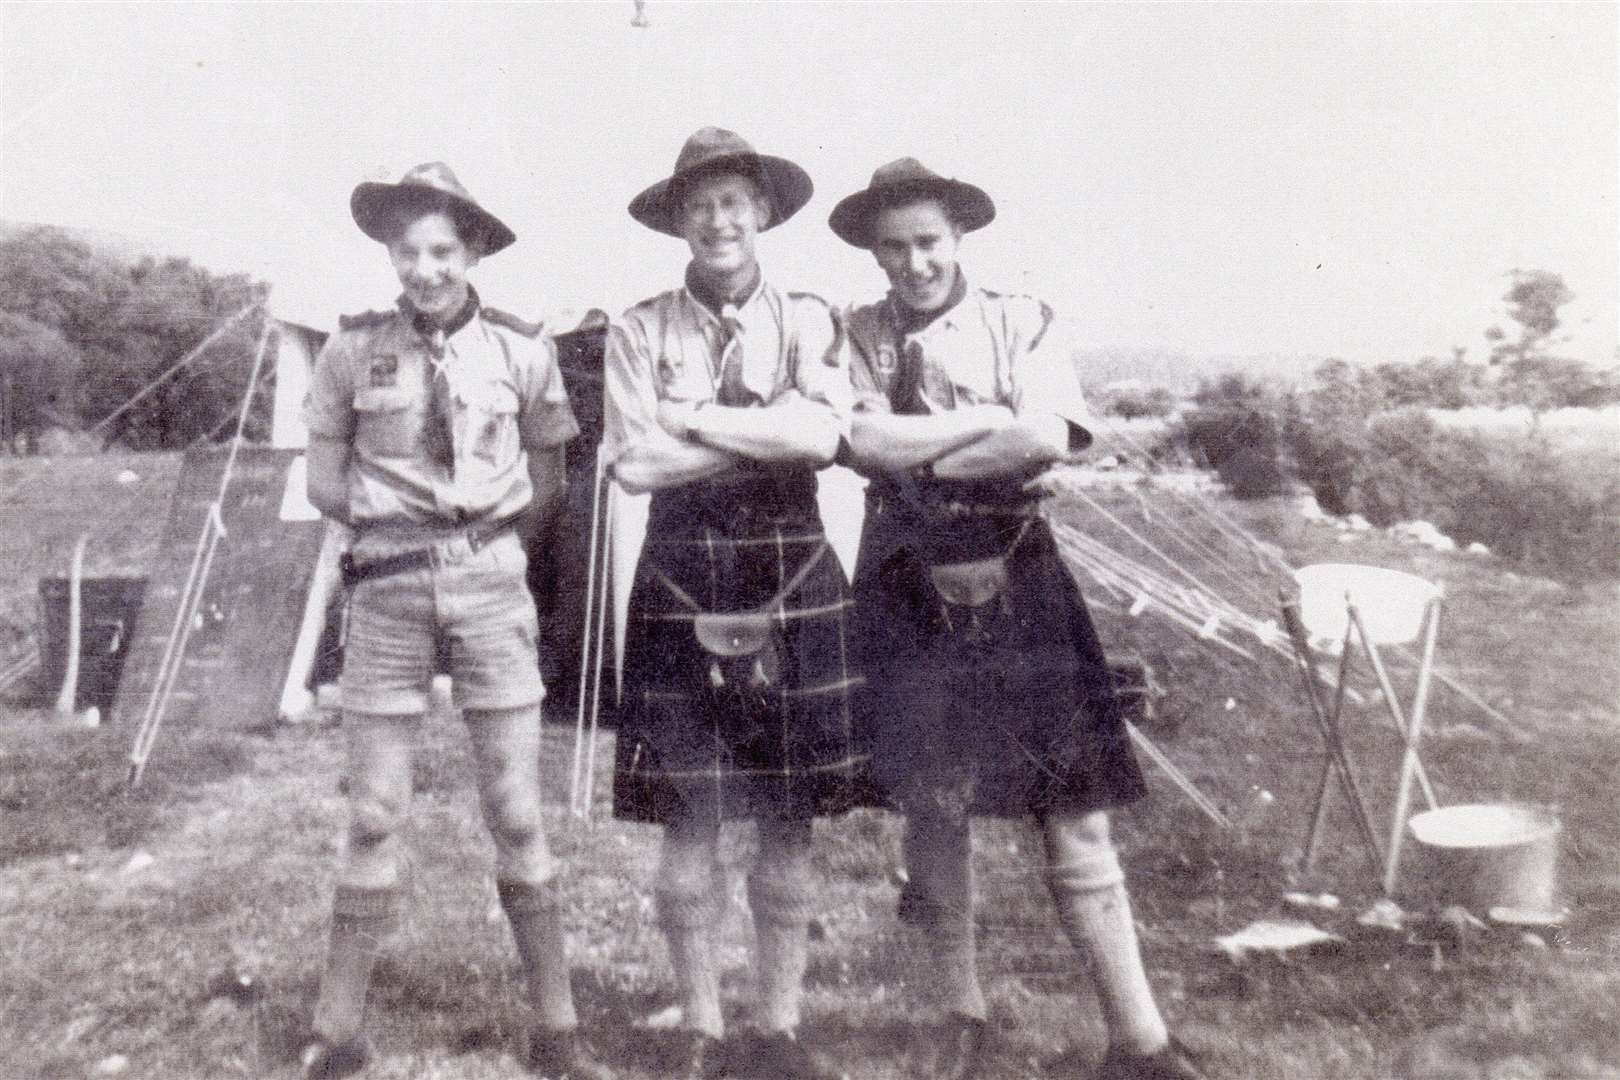 Allan Abernethy (middle) in a Scout photograph.